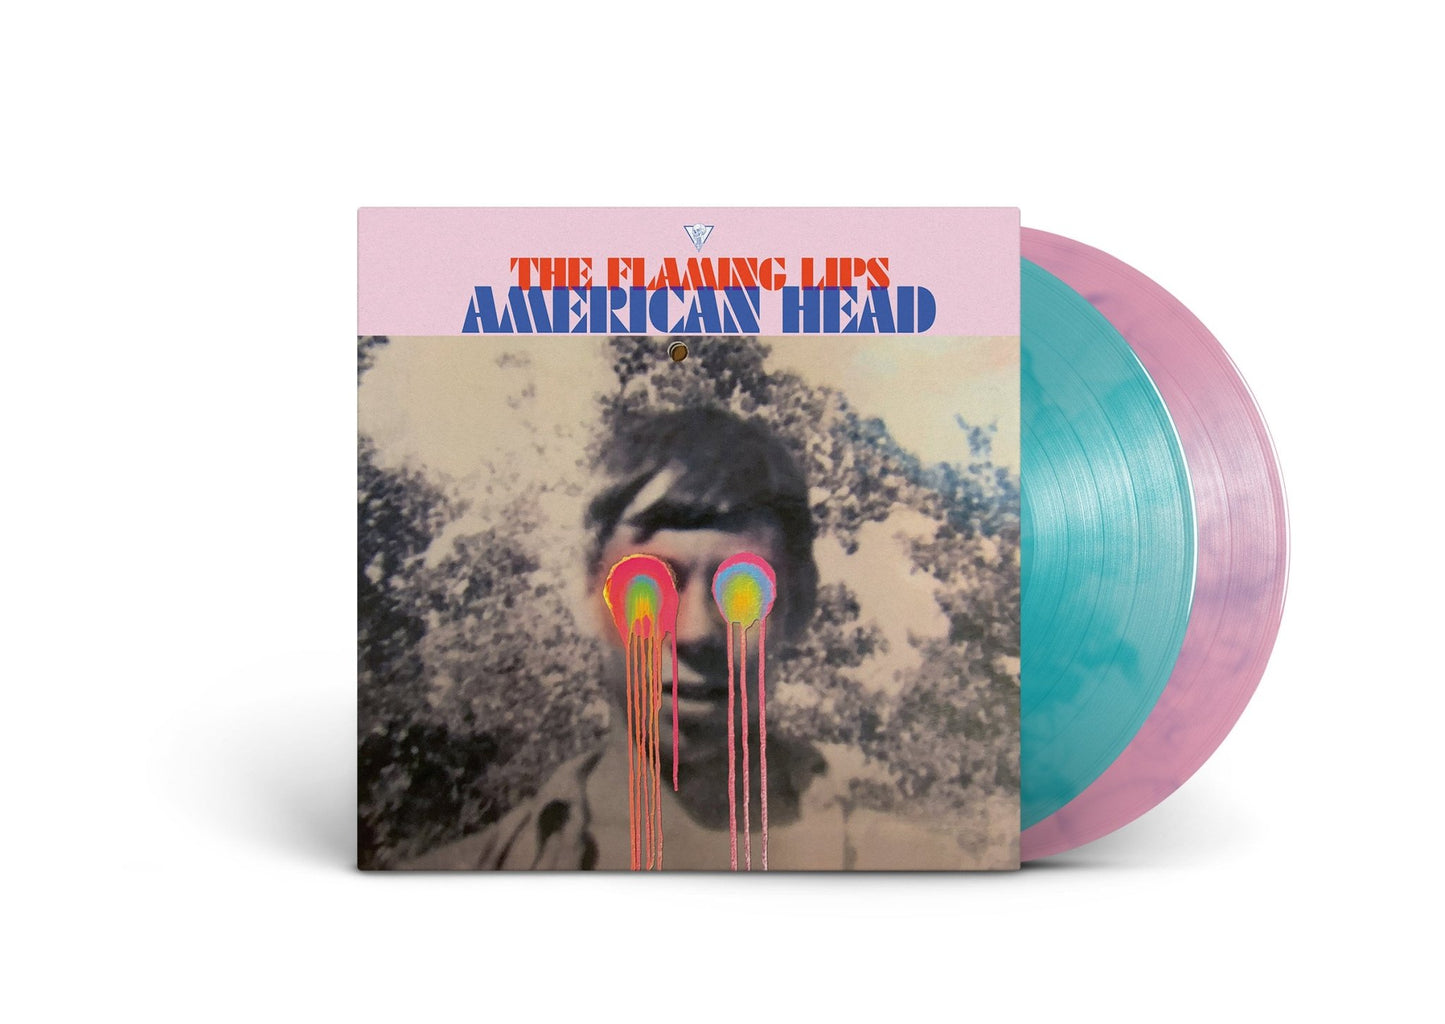 Flaming Lips, The - American Head (Pink, Blue Vinyl, Indie Exclusive) - 093624889403 - LP's - Yellow Racket Records